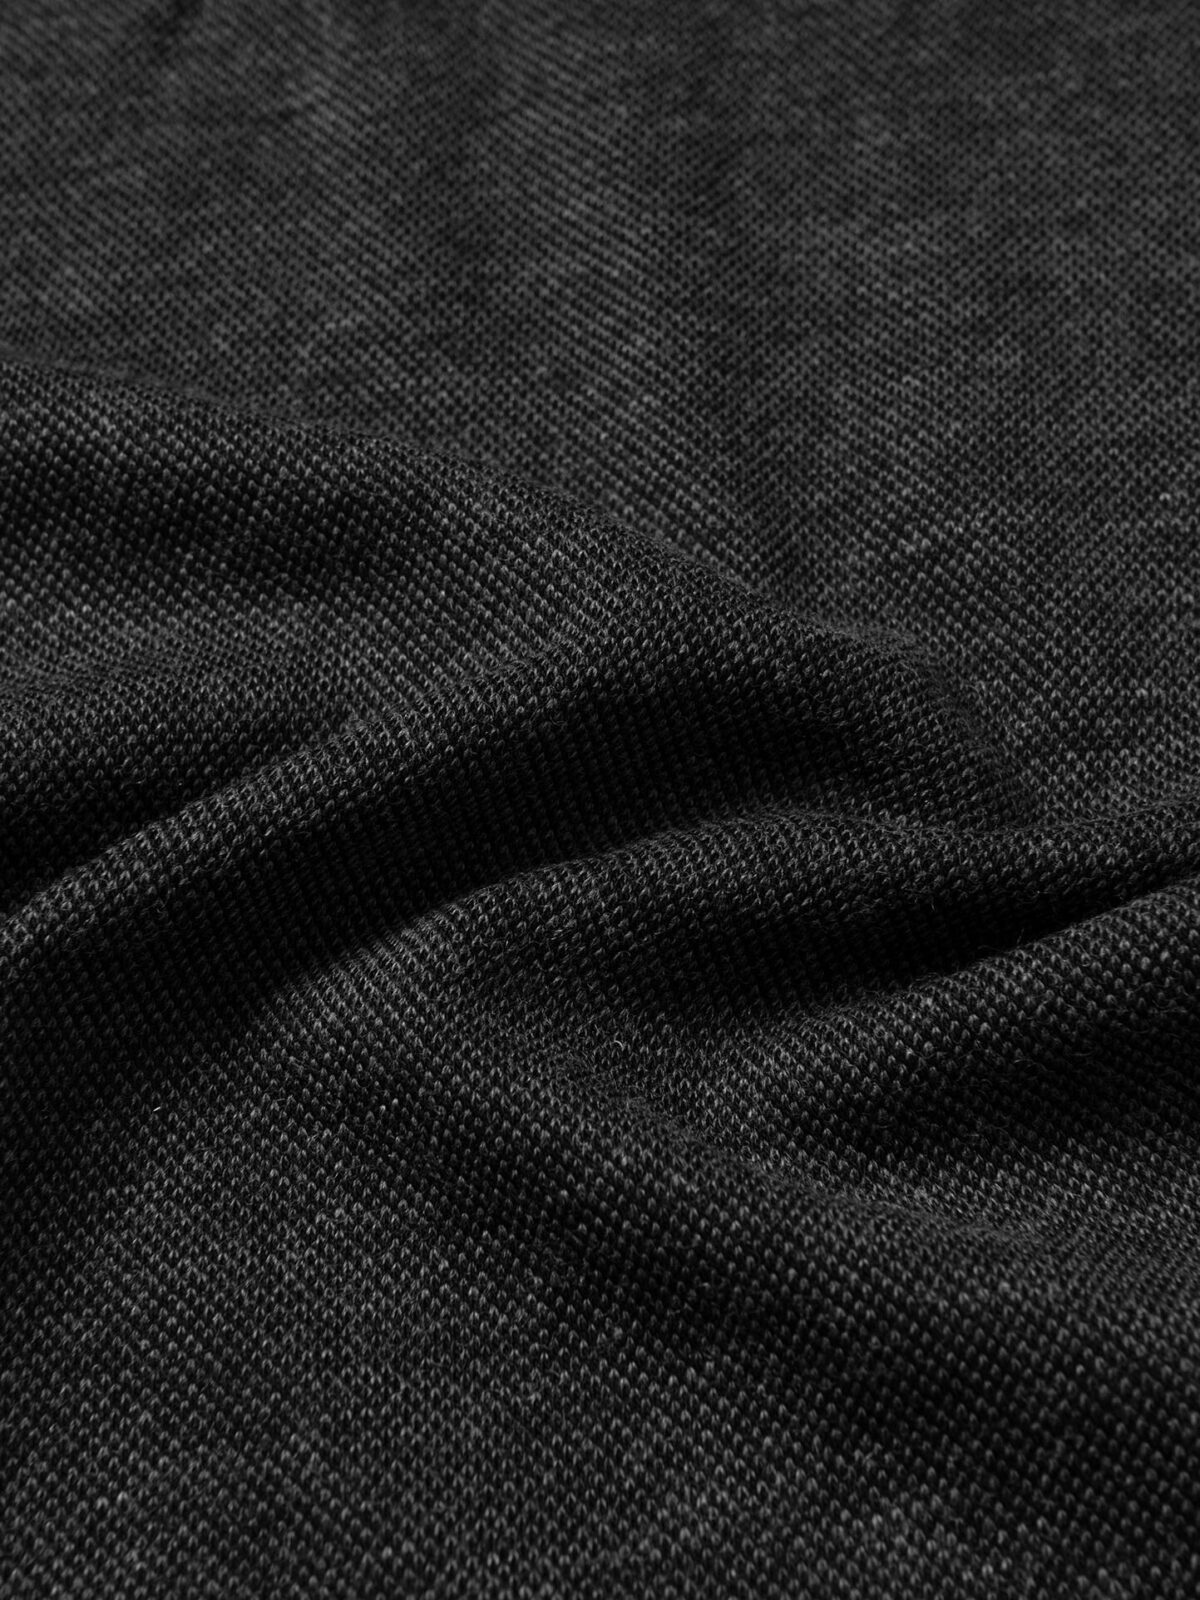 Charcoal Melange Cotton and Wool Knit Pique Shirts by Proper Cloth